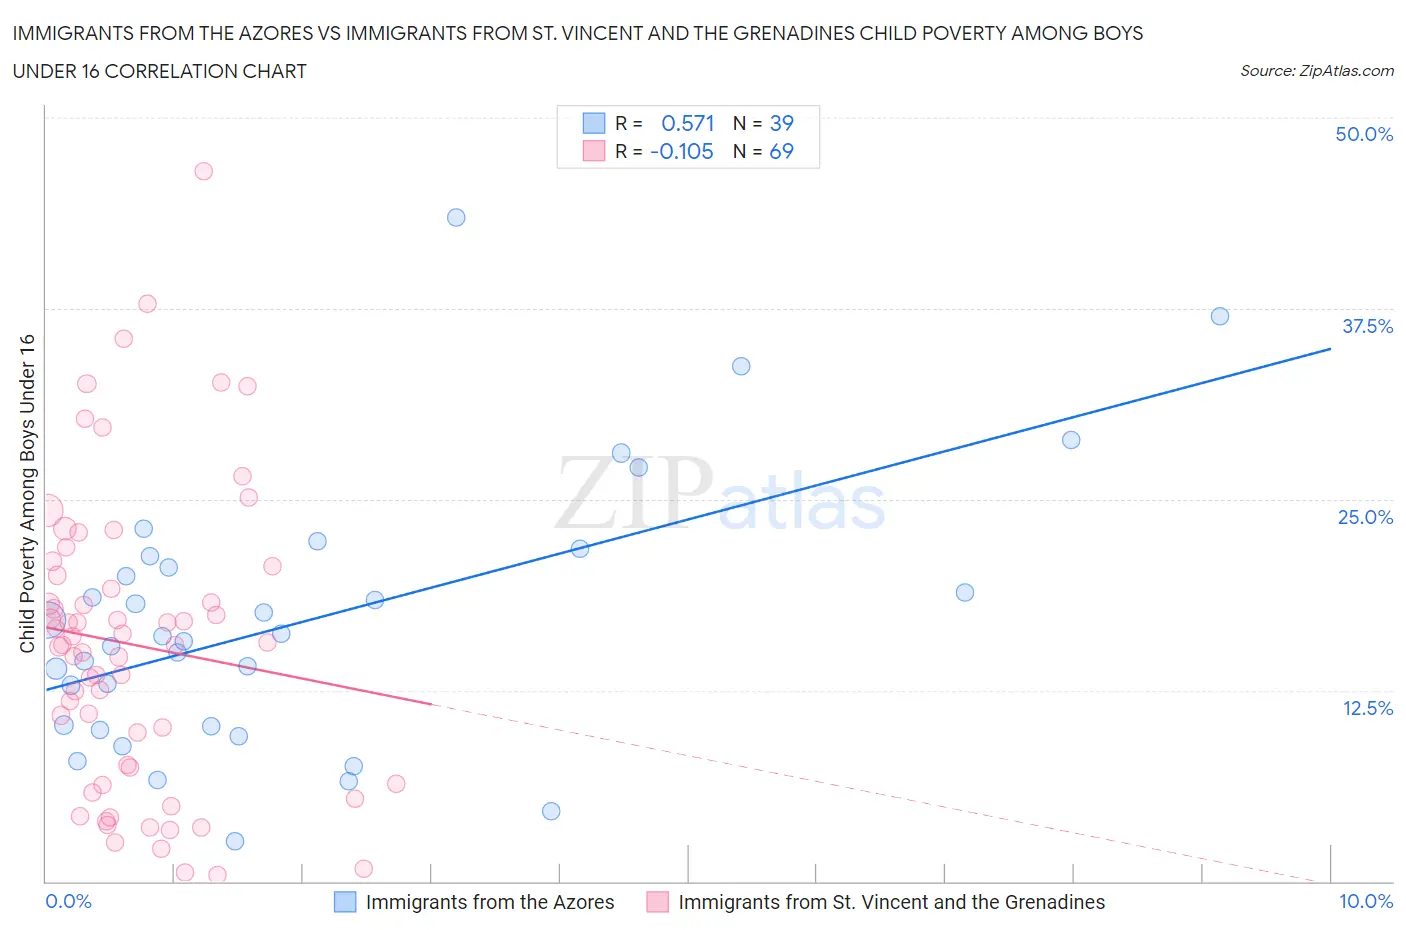 Immigrants from the Azores vs Immigrants from St. Vincent and the Grenadines Child Poverty Among Boys Under 16